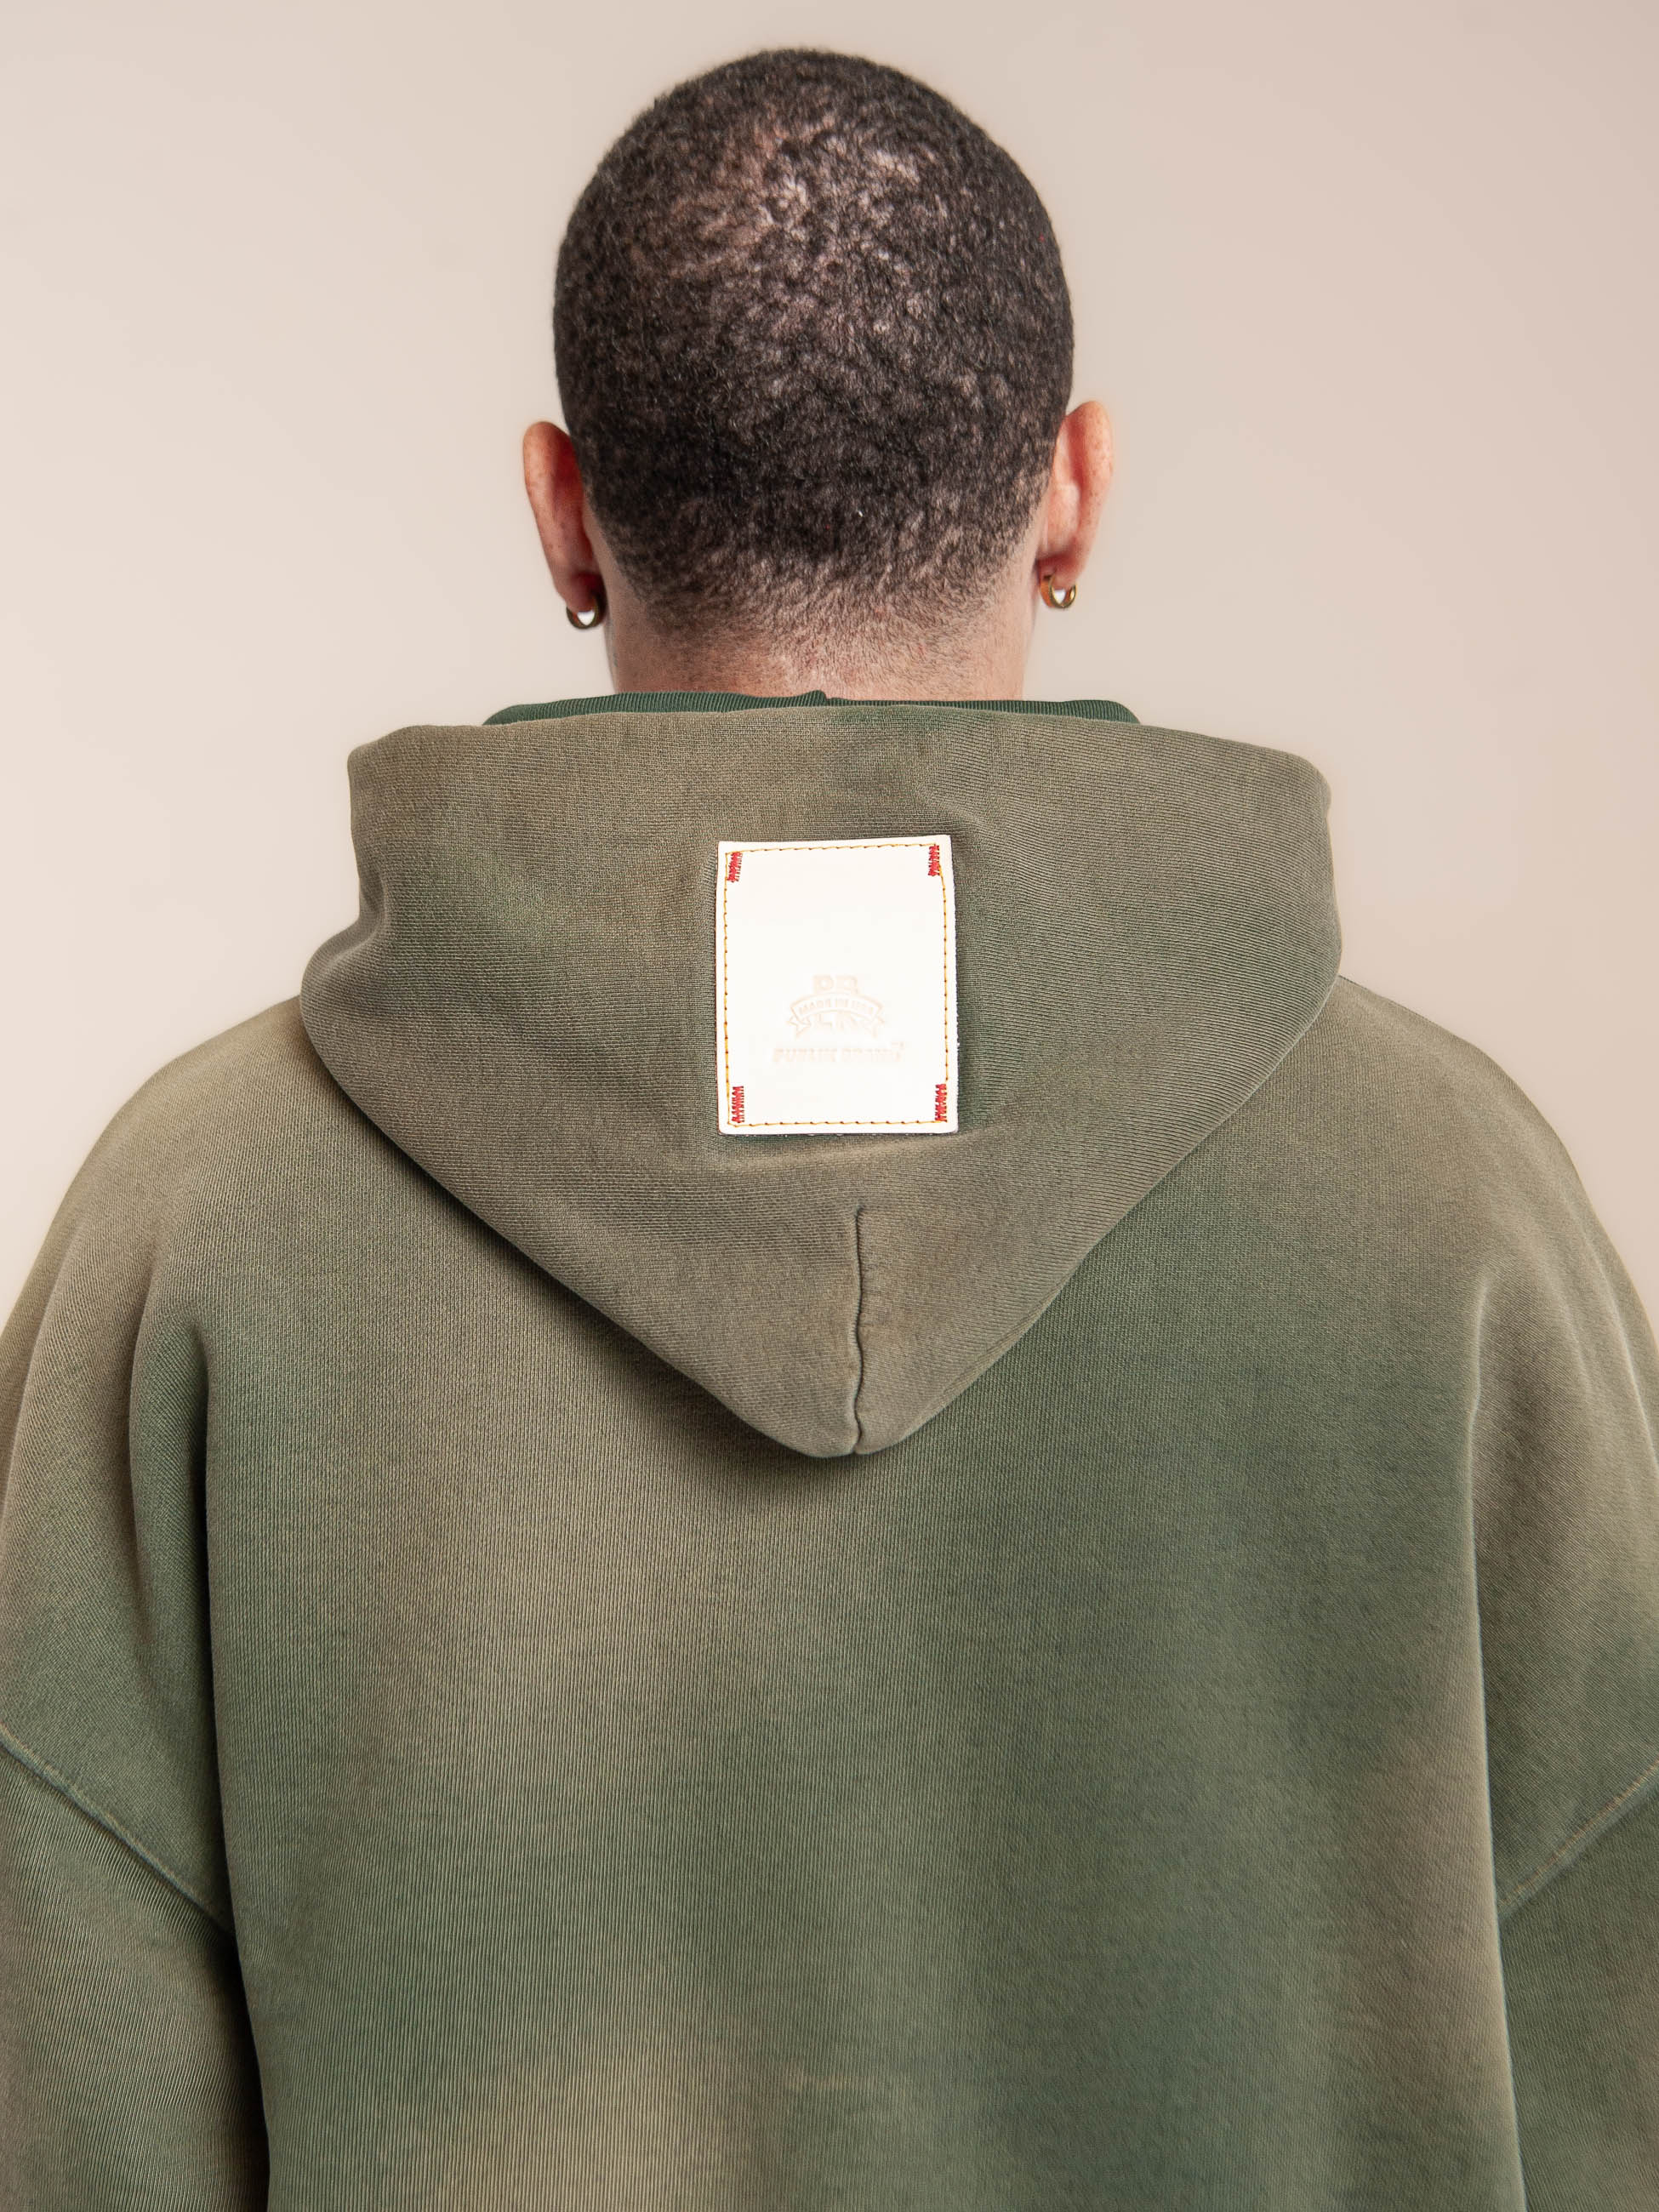 Publik Brand Double Layered Hoodie Reseda Green Heavyweight Fleece, all made in USA, back side view